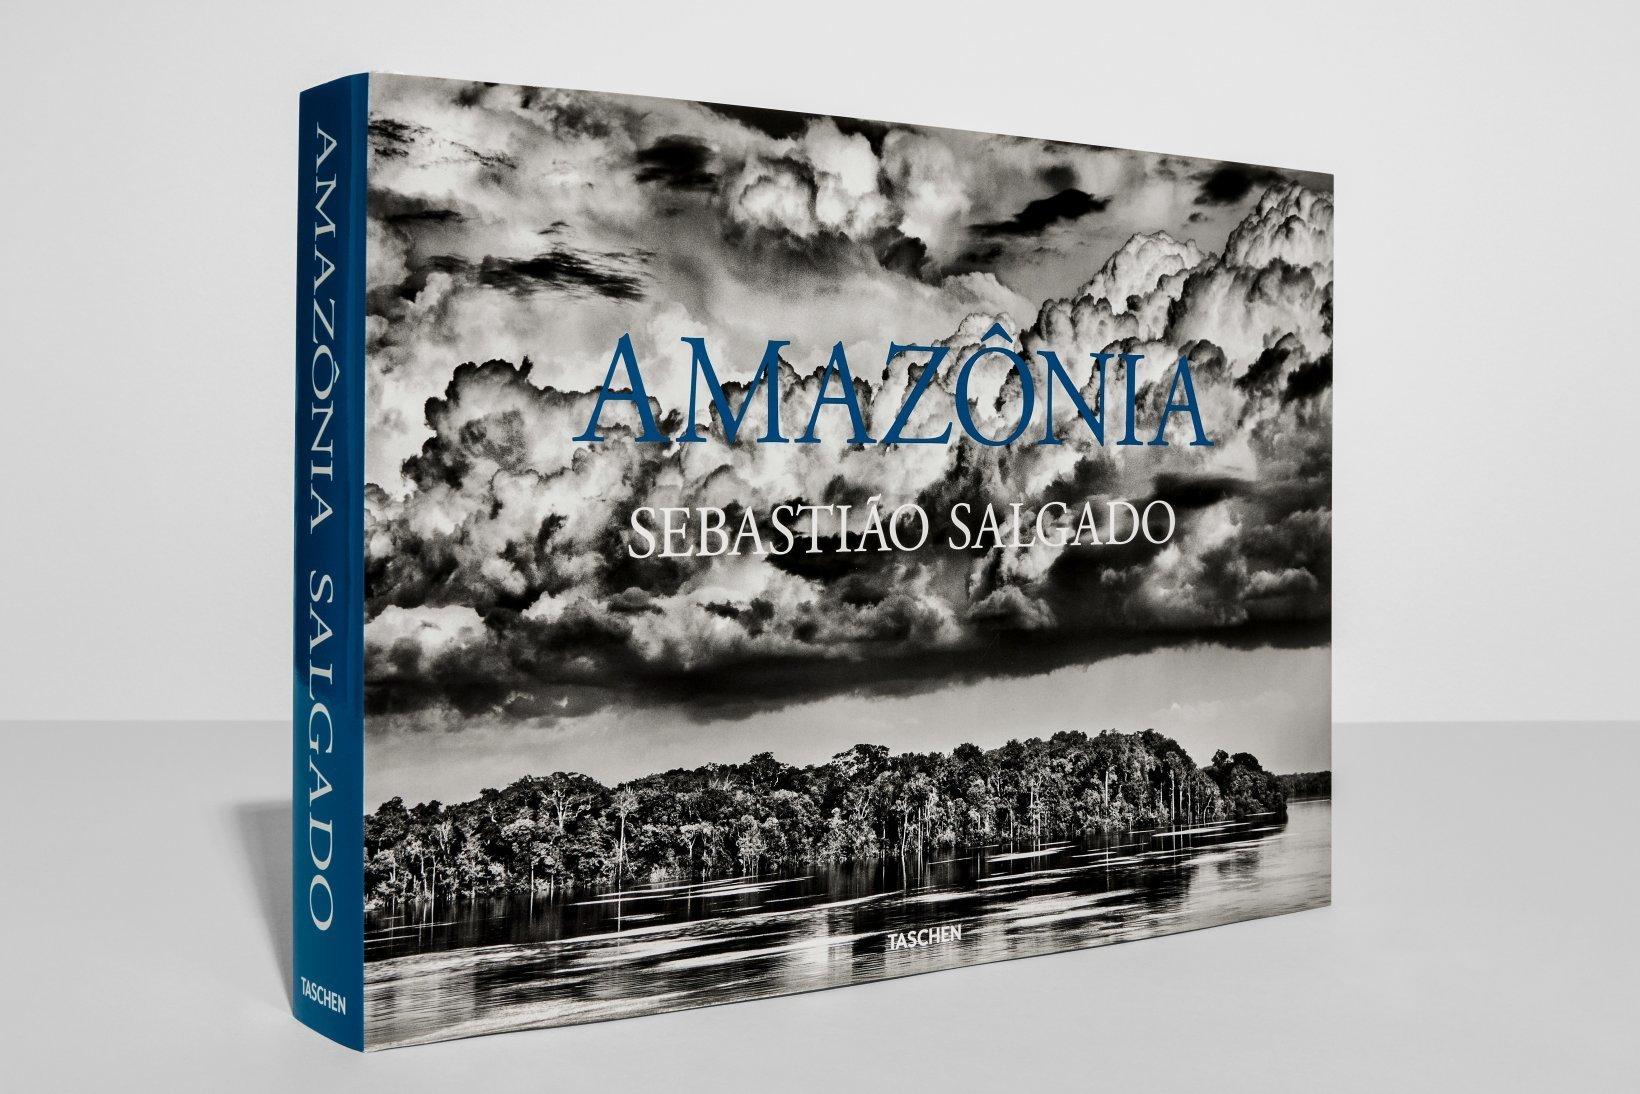 Hardcover Photography book, 14.1 x 10.2 in., 9.21 lb, 528 pages.

For six years Sebastião Salgado traveled the Brazilian Amazon and photographed the unparalleled beauty of this extraordinary region: the rainforest, the rivers, the mountains, the